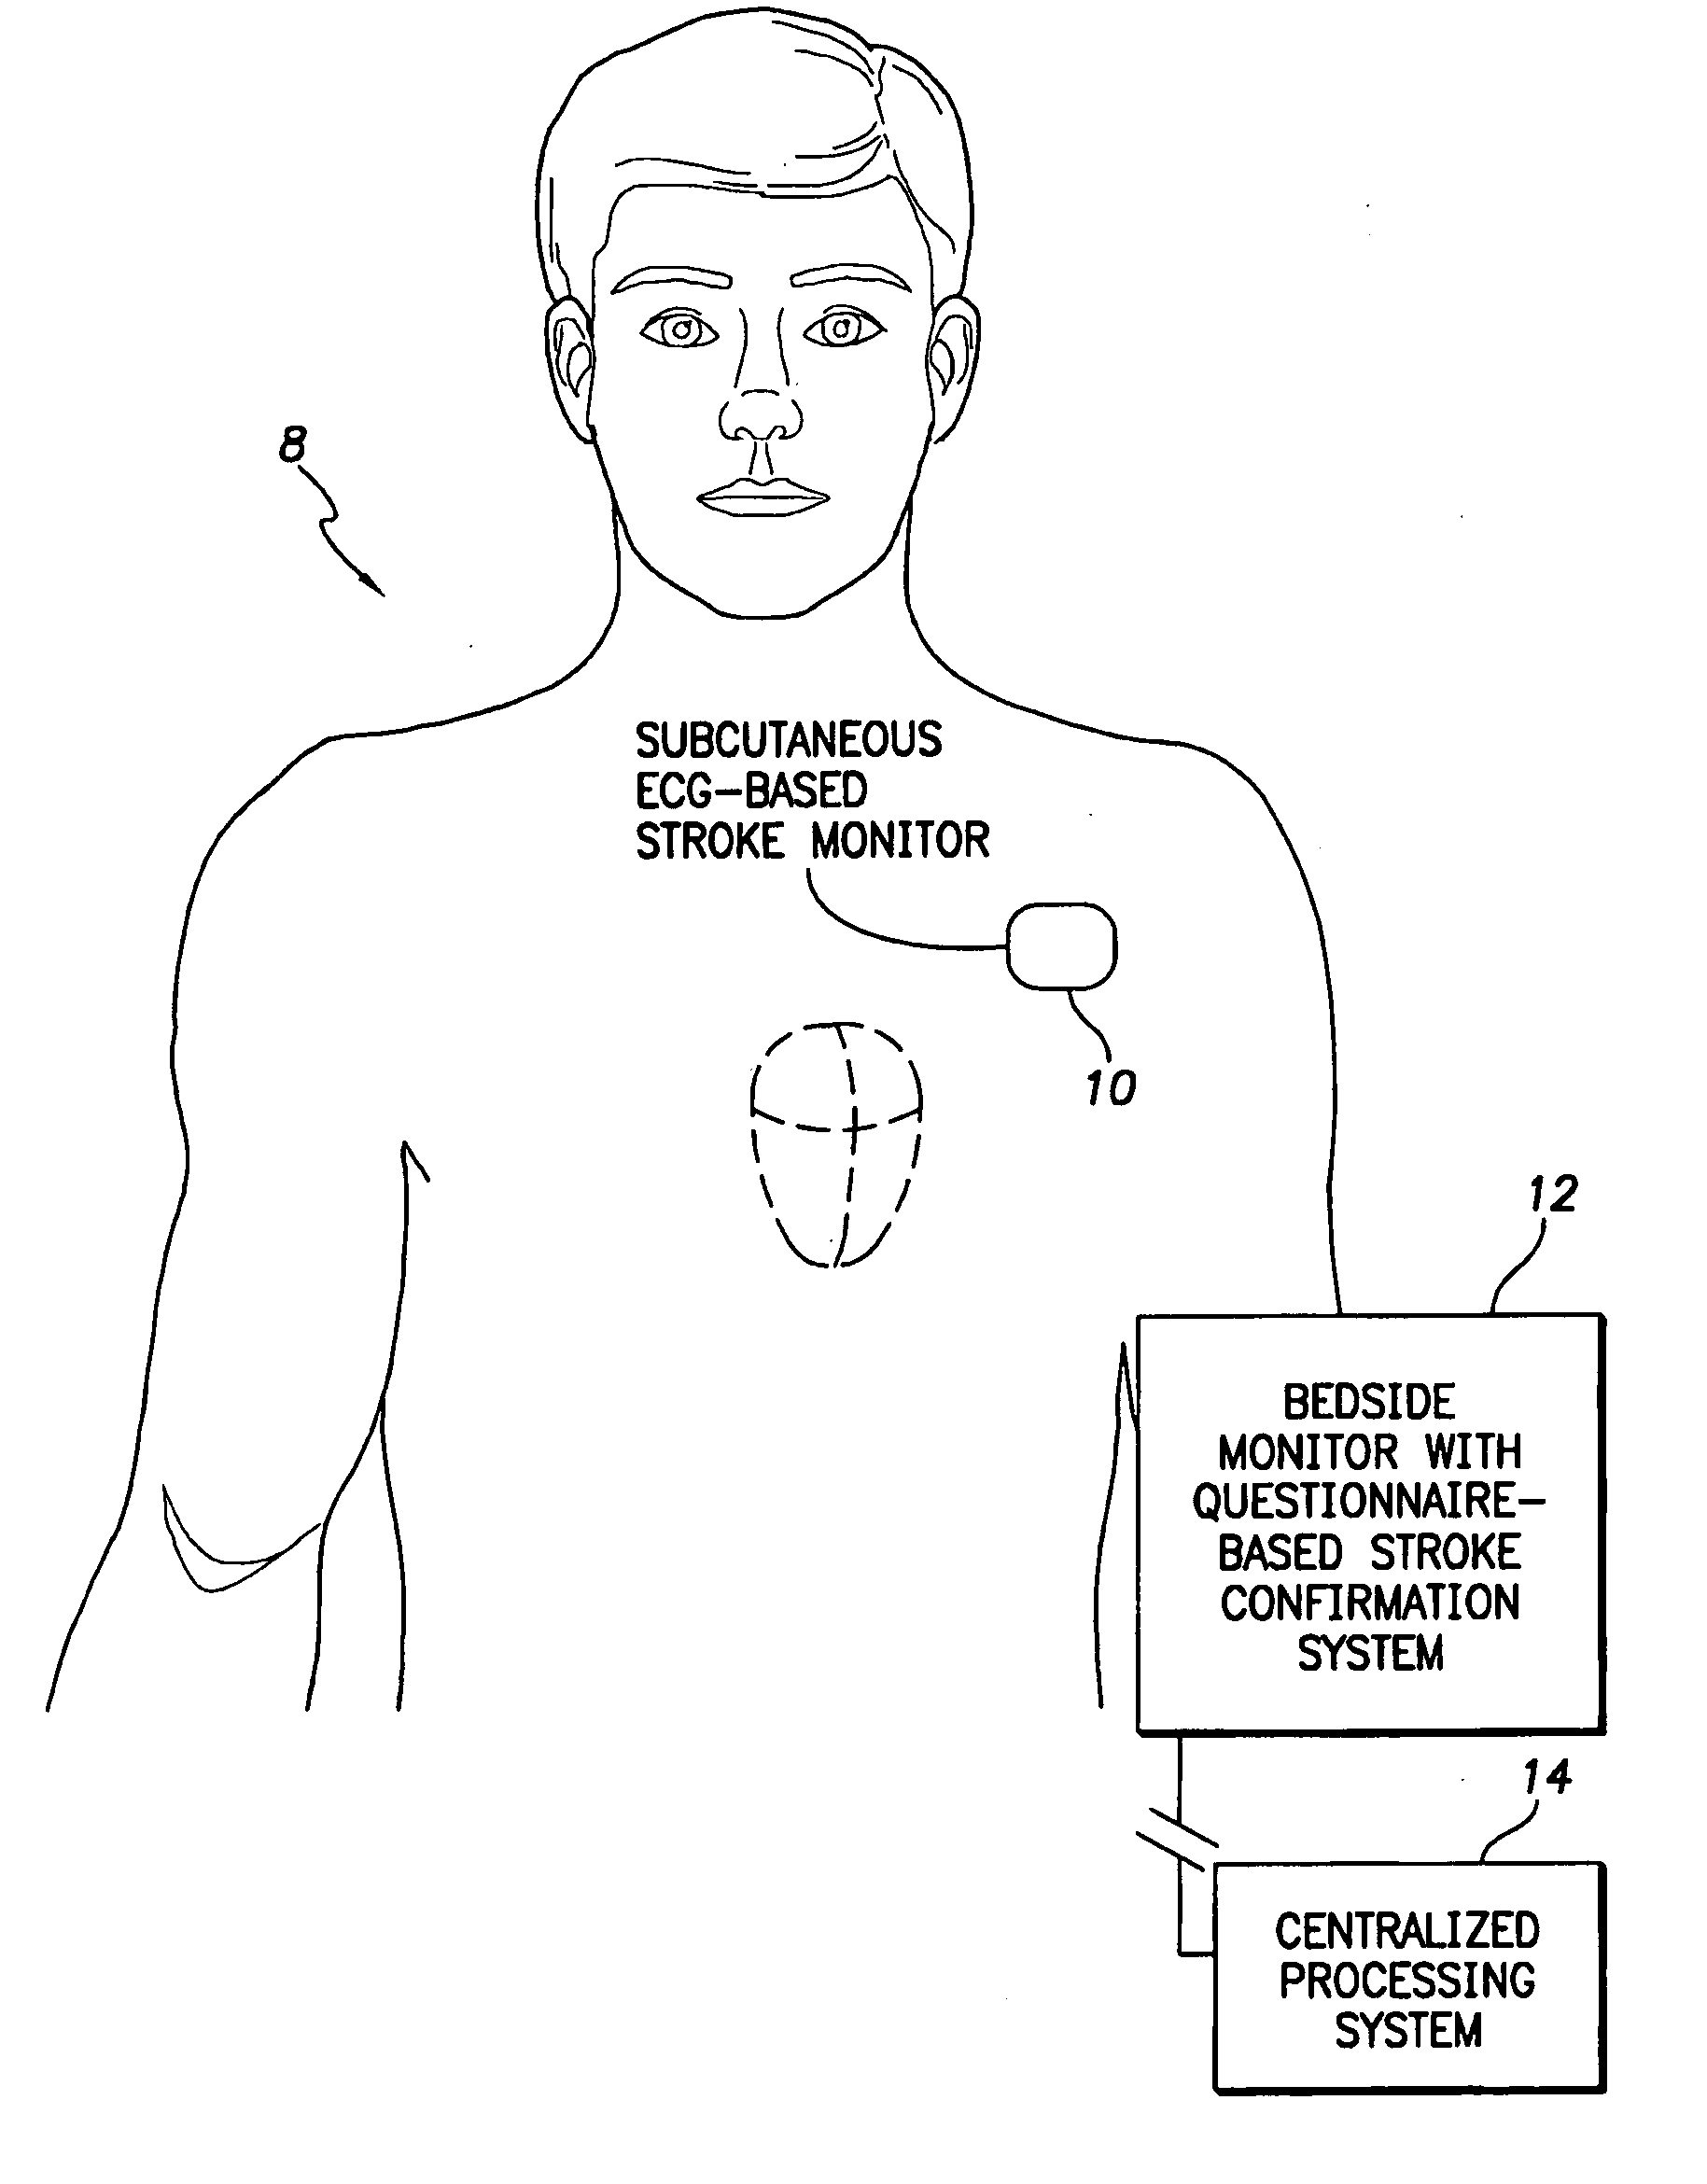 Systems and Methods for Use with an Implantable Medical Device for Detecting Stroke Based on Electrocardiac Signals